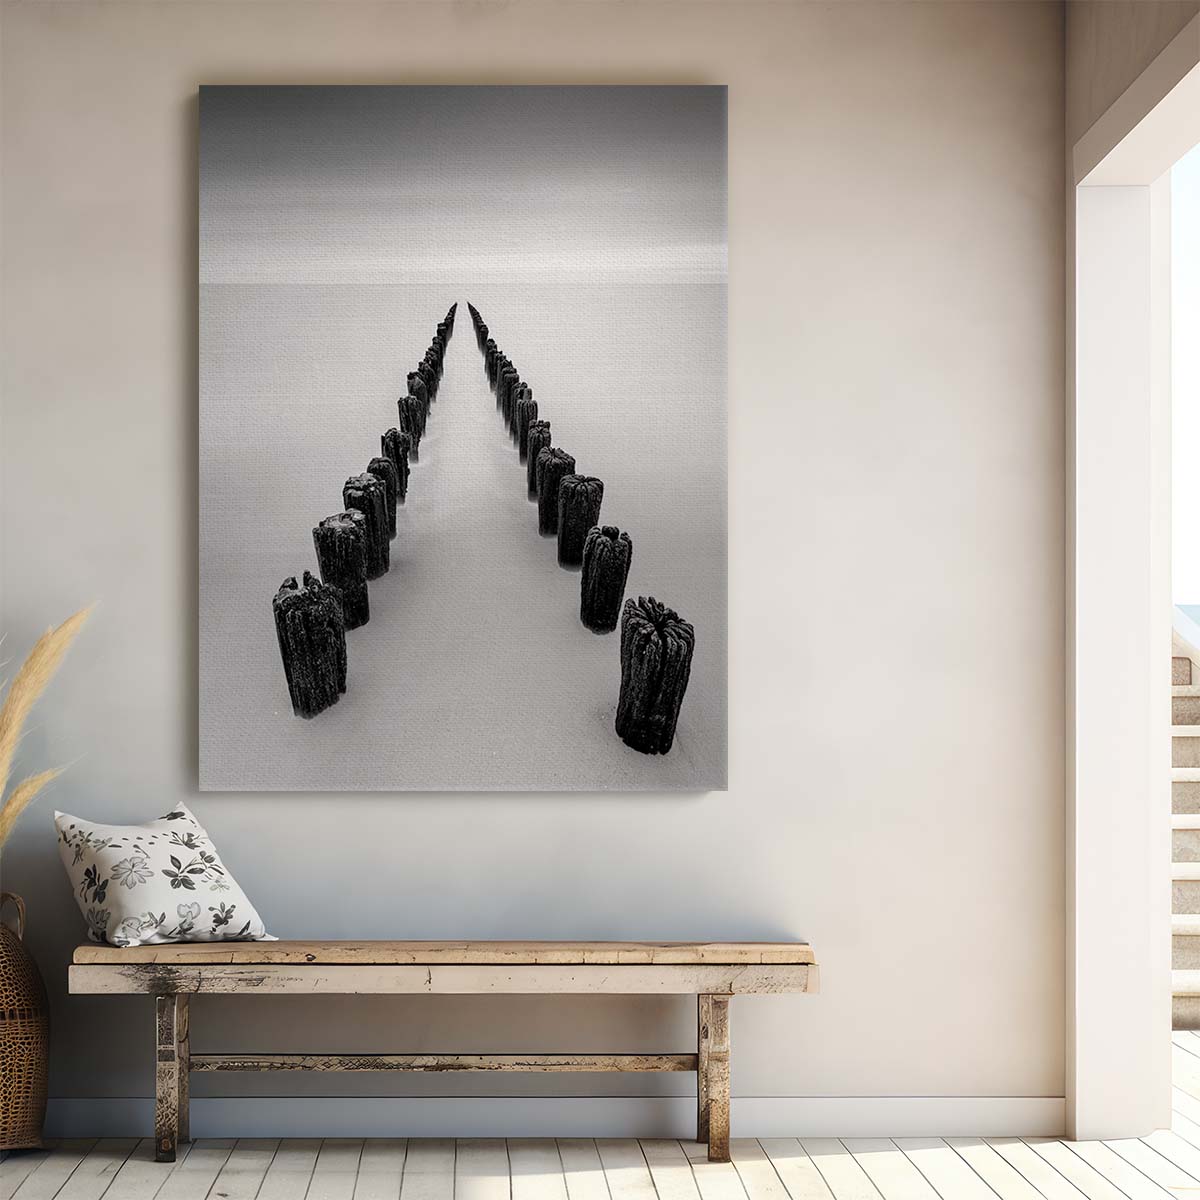 Minimalistic Black and White Coastal Landscape Photography Art by Luxuriance Designs, made in USA